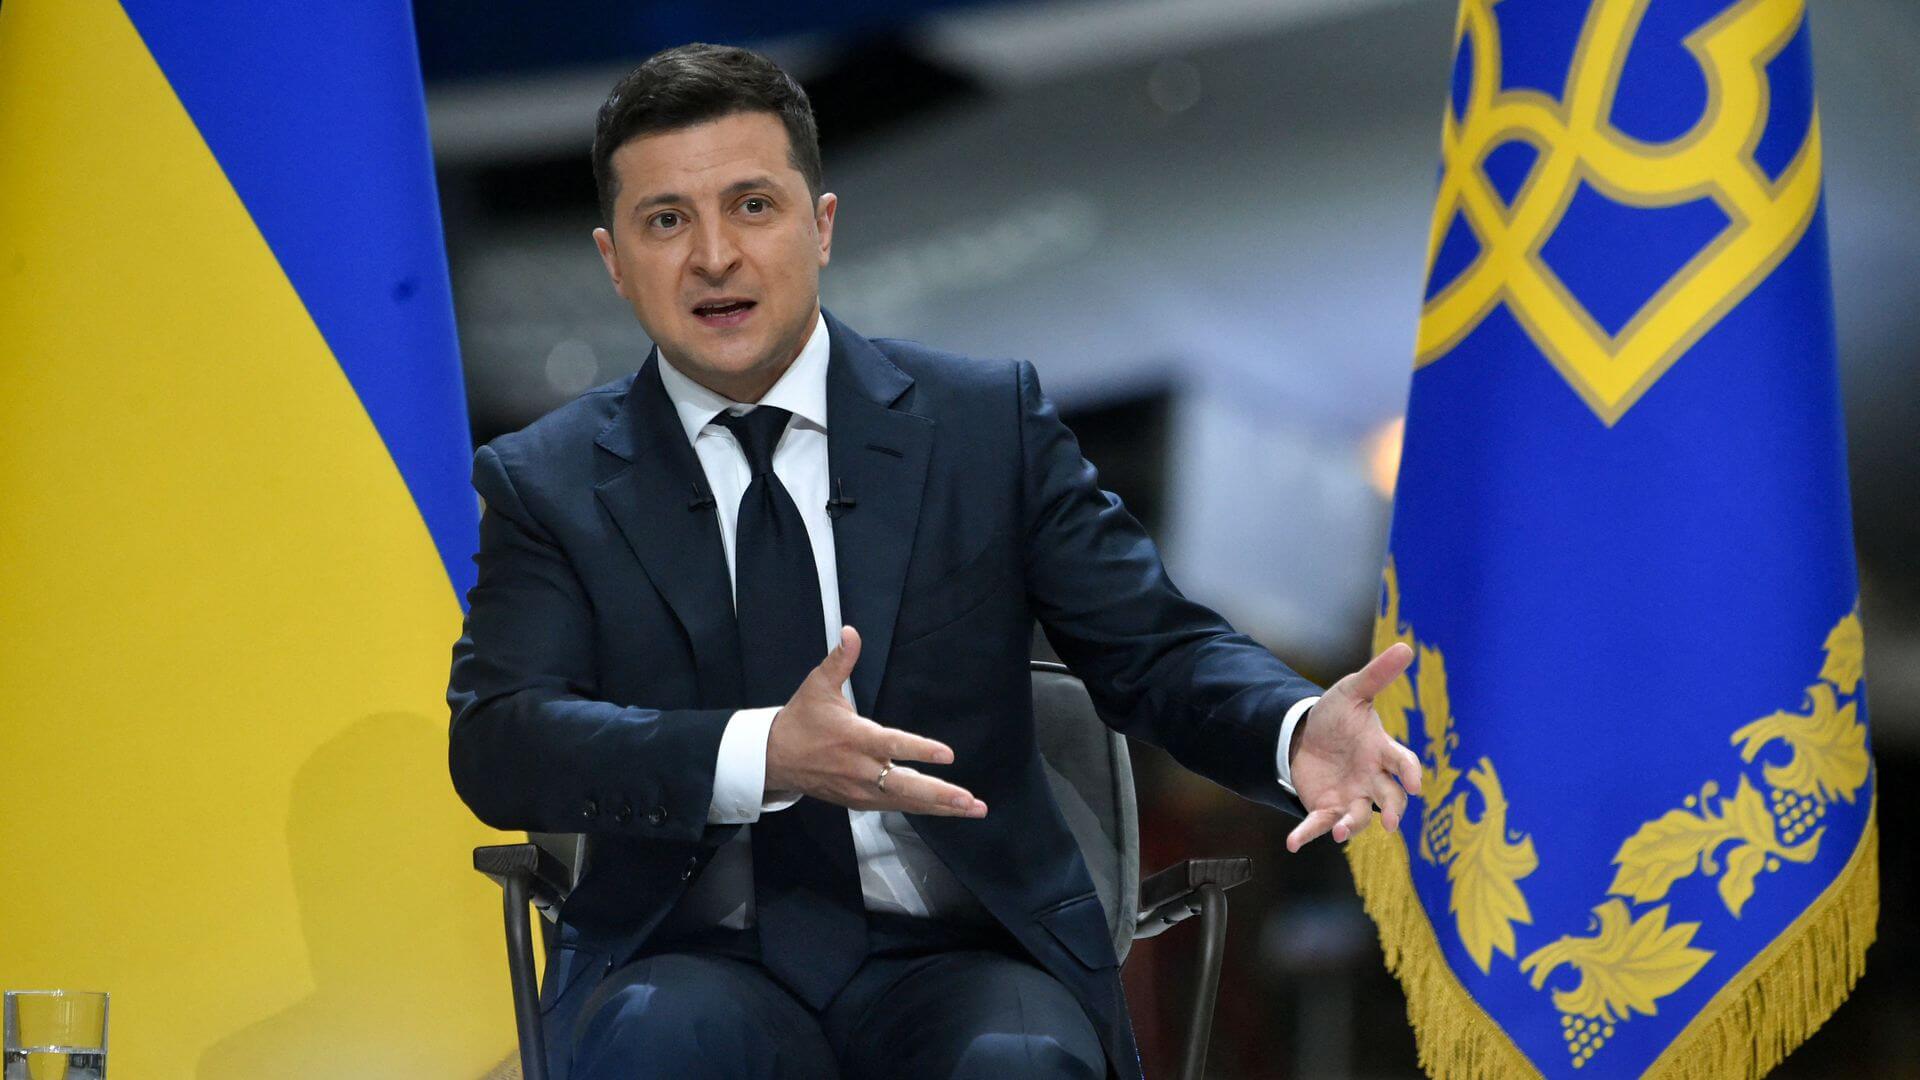 Thousands Flee Ukraine as Zelensky Says Kyiv “Left Alone” to Thwart Russian Invasion